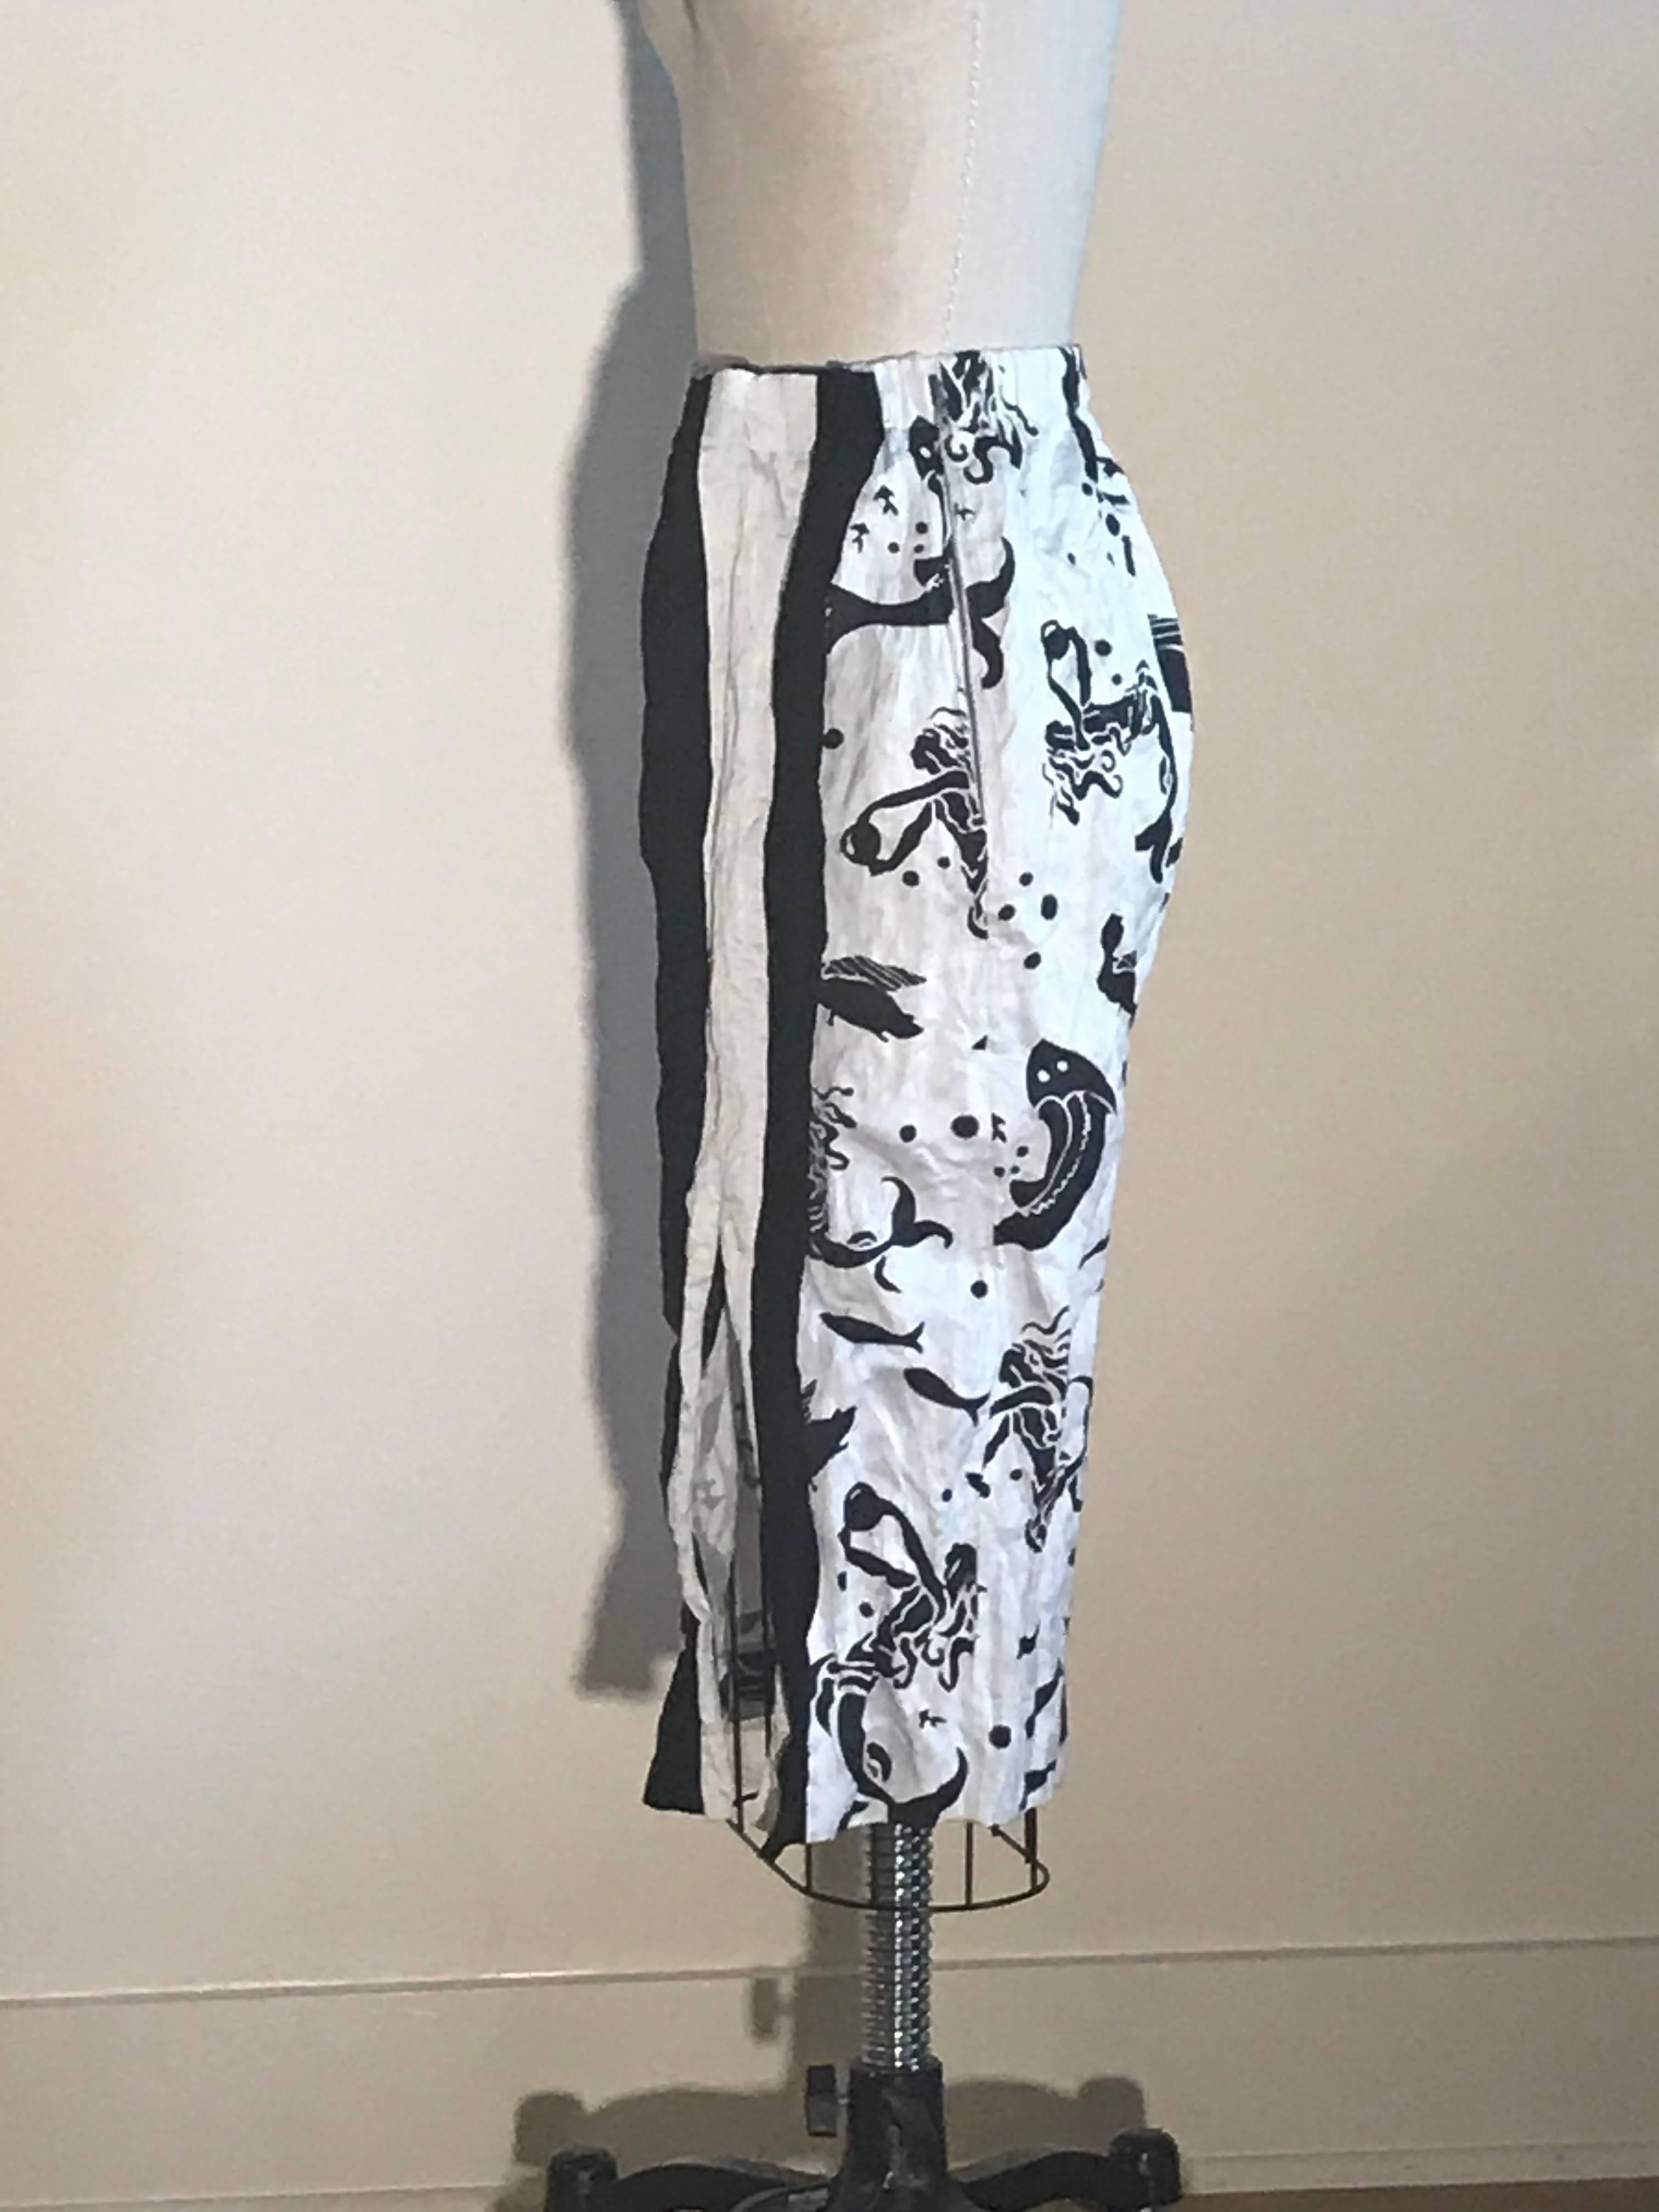 Prada white and black mermaid and fish print crinkle texture pencil skirt, as seen on the Spring Summer 2009 runway. Elastic waist, side zip.

75% cotton, 26% metal.

Made in Italy.

Size IT 40, approximate US 4. See measurements.
Waist 26